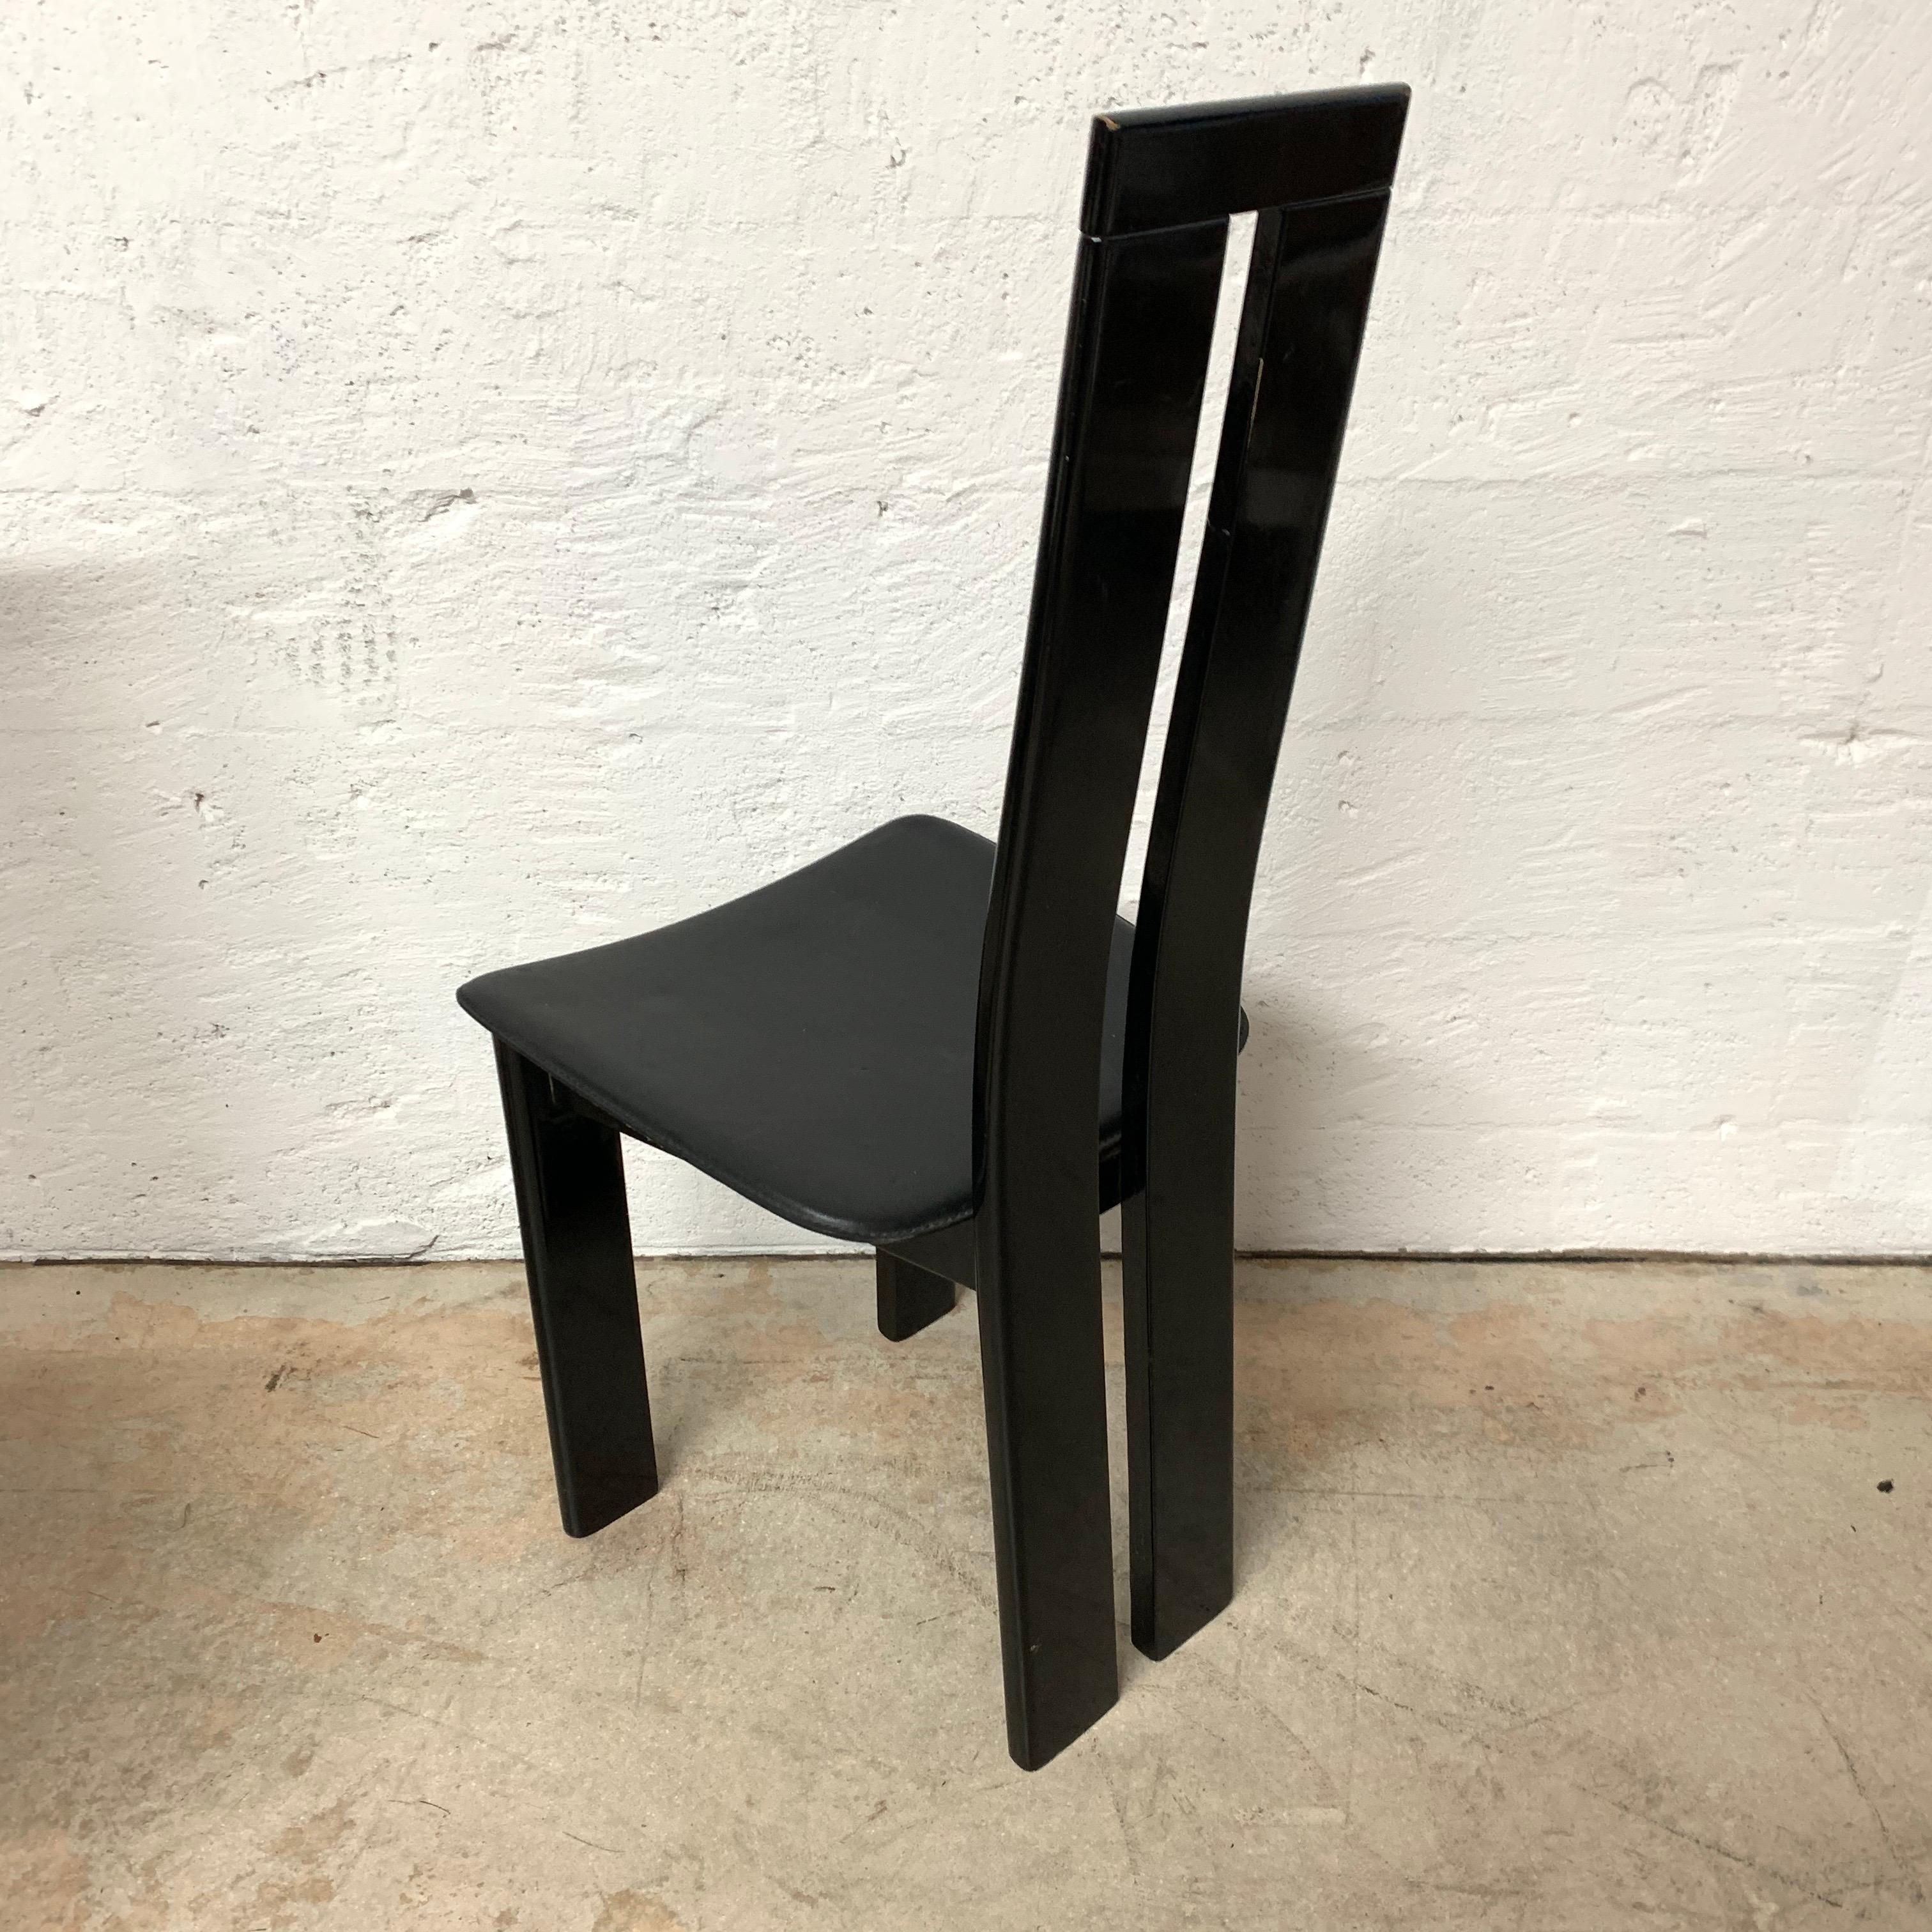 Pair of Italian Postmodern Chairs by Massimo Vignelli 1